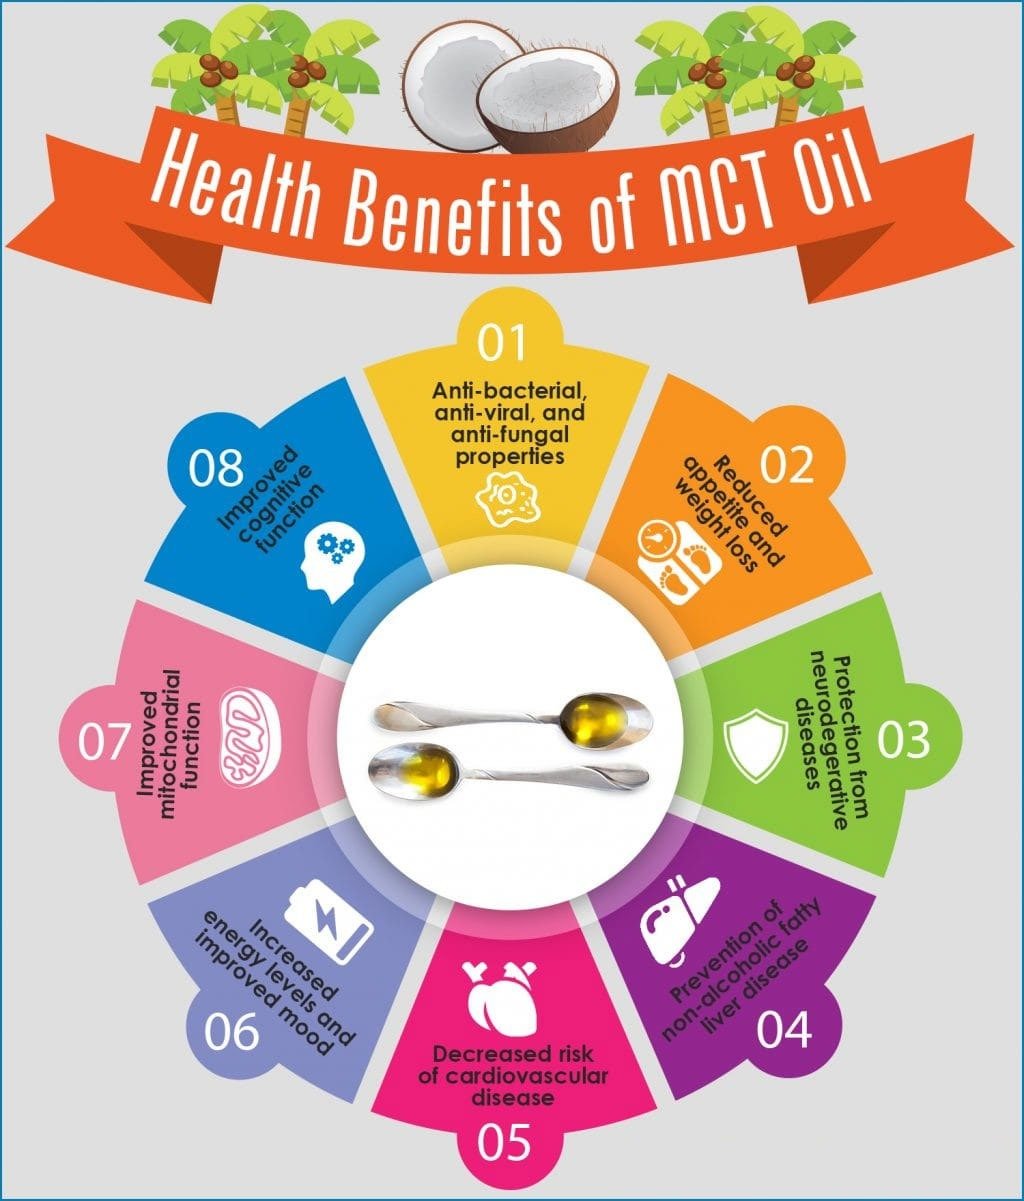 MCT Oil Benefits for Overall Health